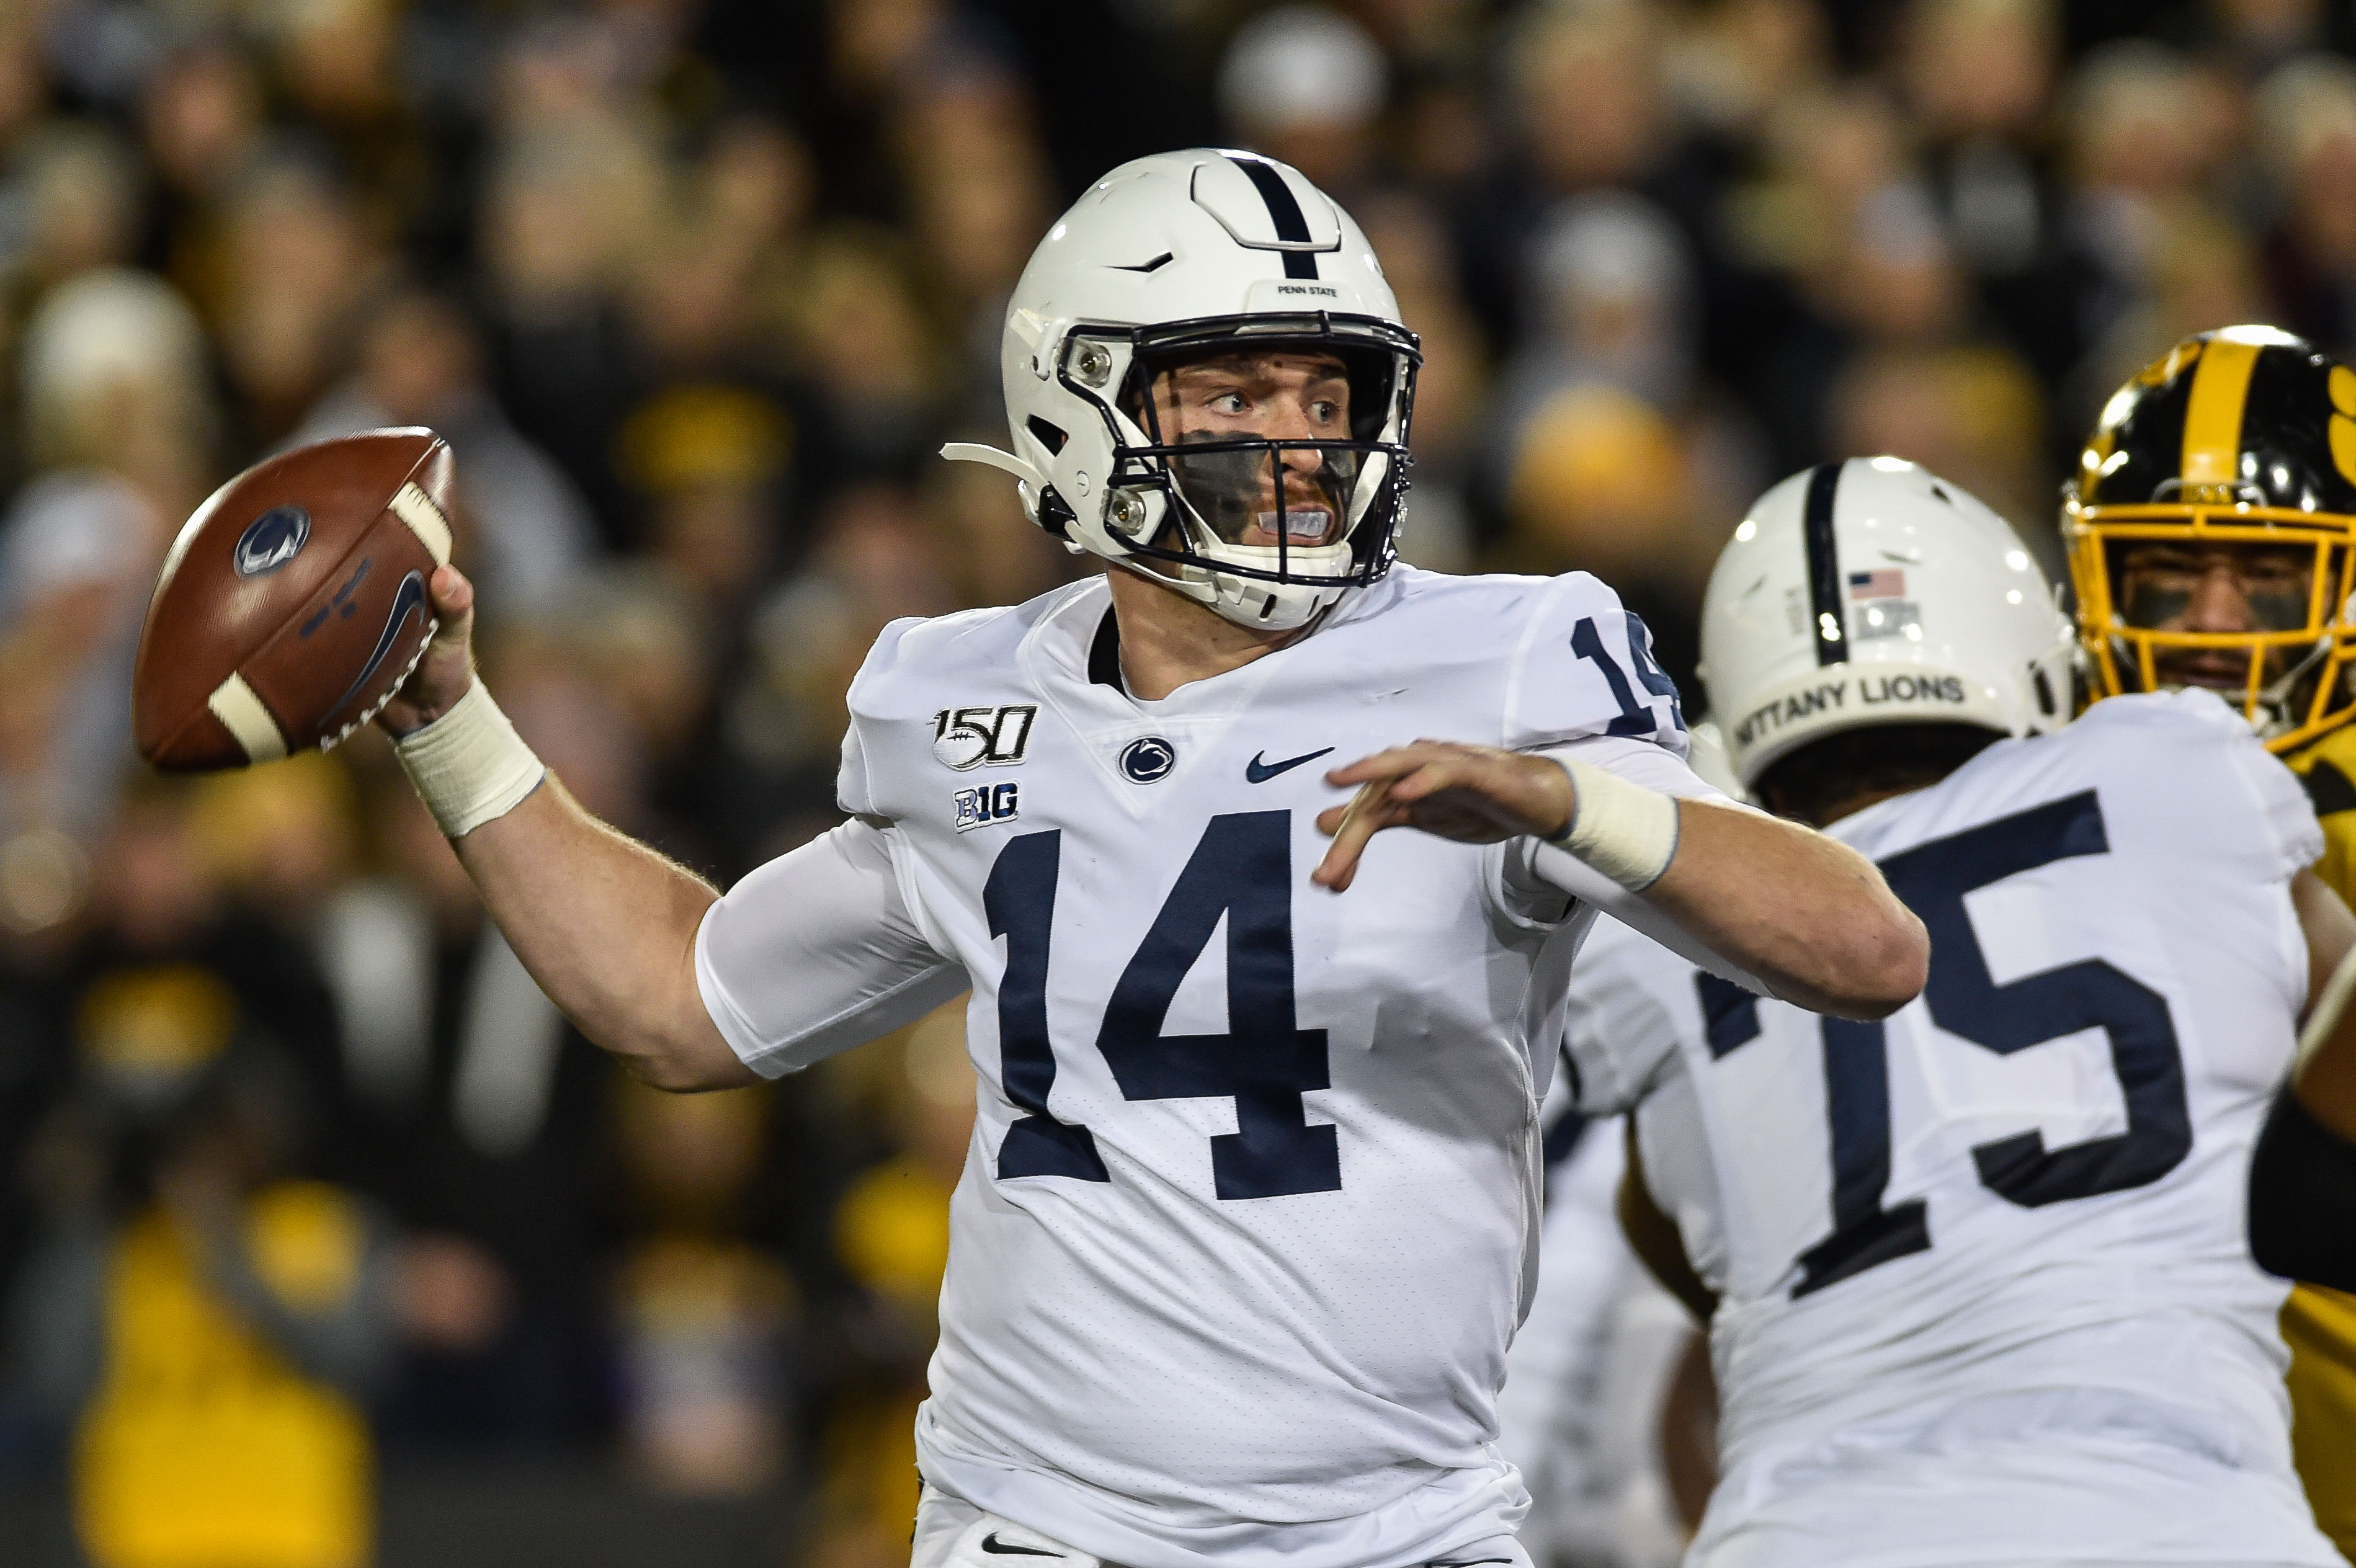 Podcast: Wrapping up Penn State vs. Iowa and Week 7